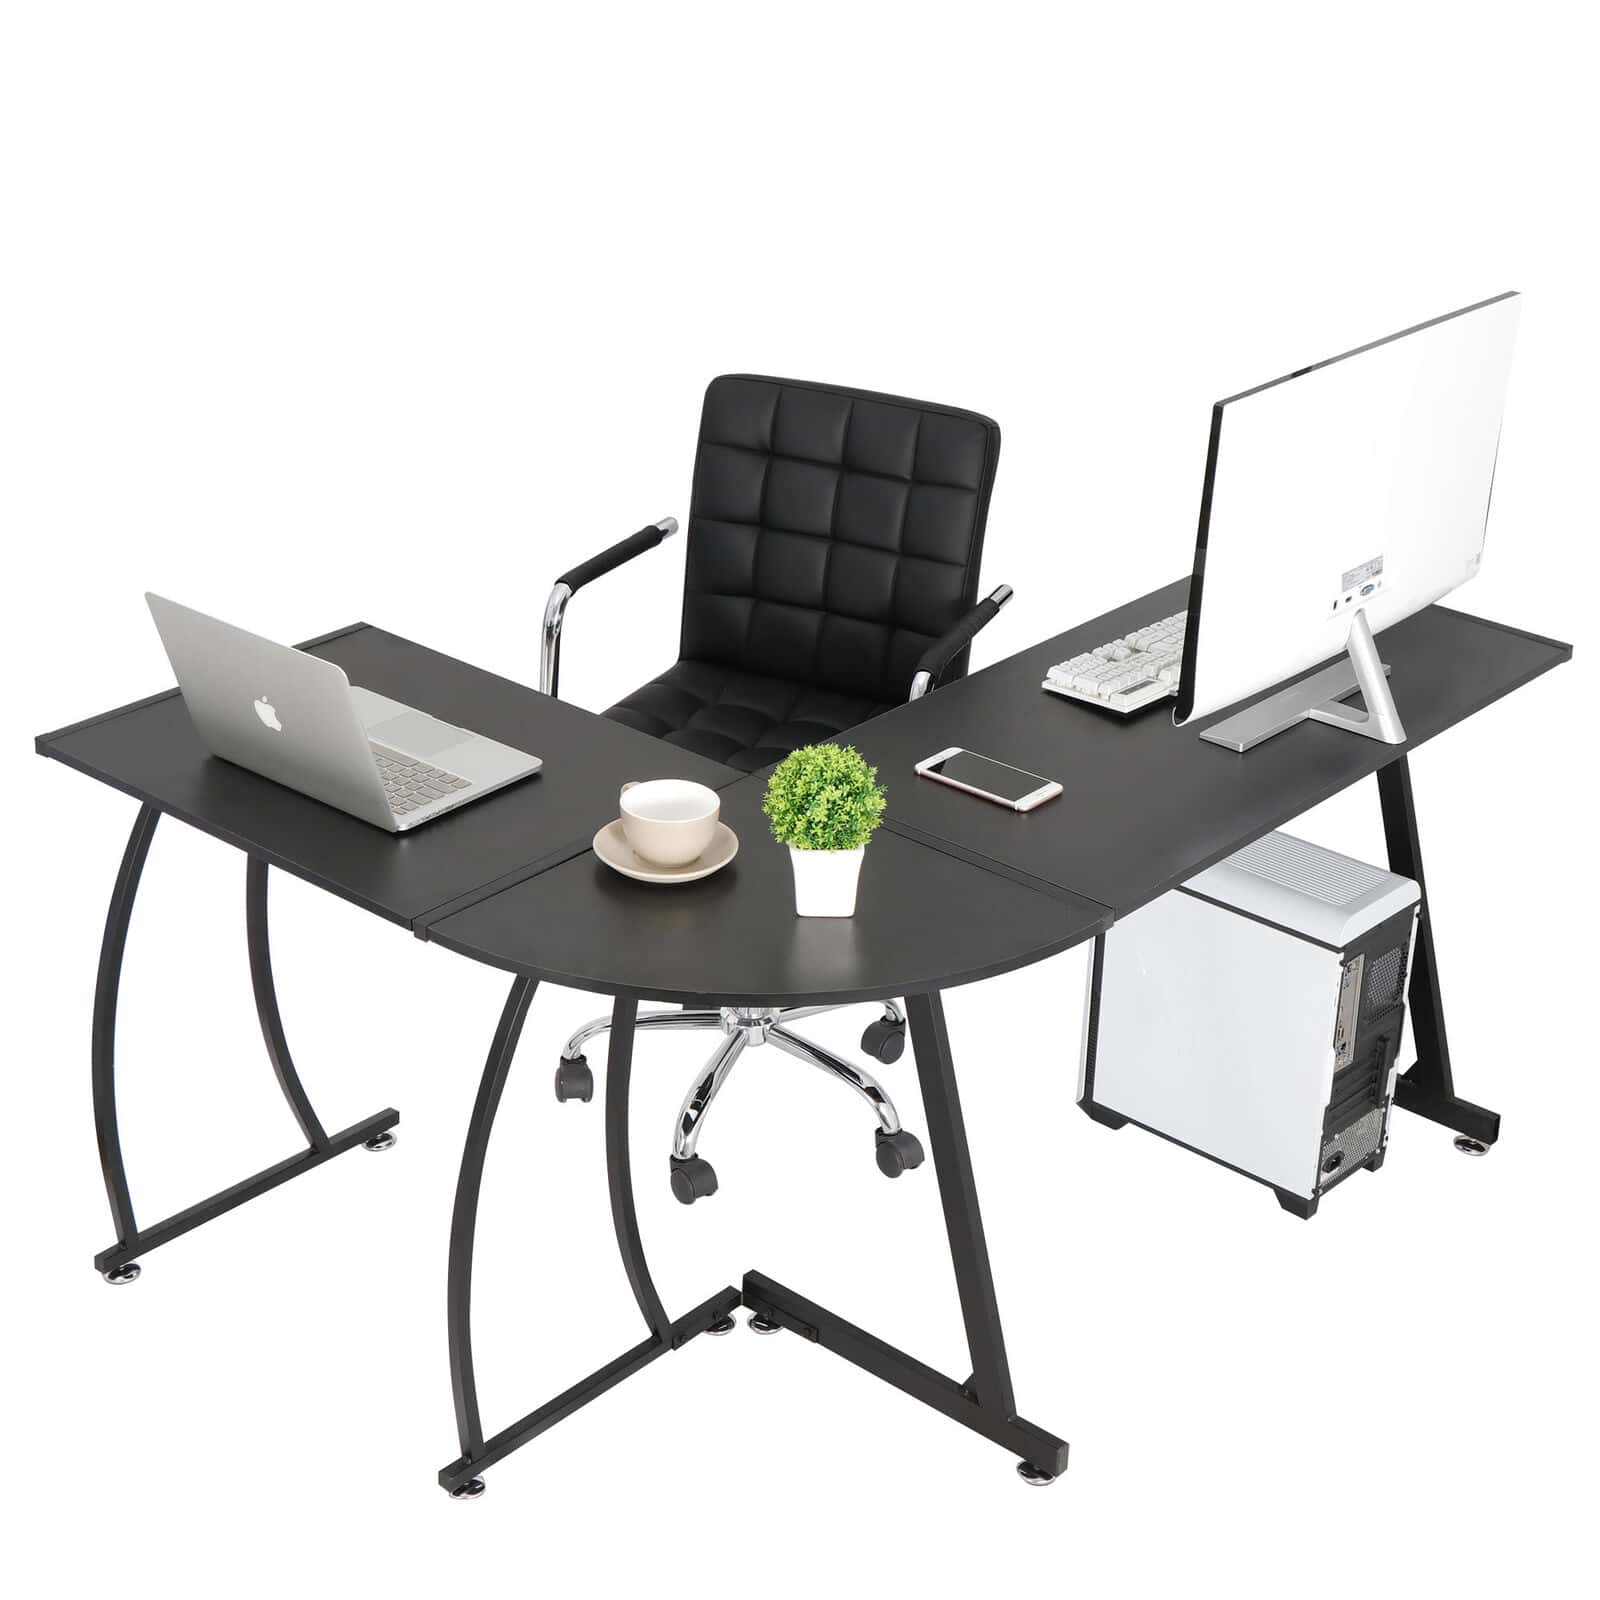 A 58″ Computer Gaming Laptop Table L Shaped Desk Workstation Home Office Desk with a laptop, monitor, phone, coffee cup, and decorative plant, set against a white background.